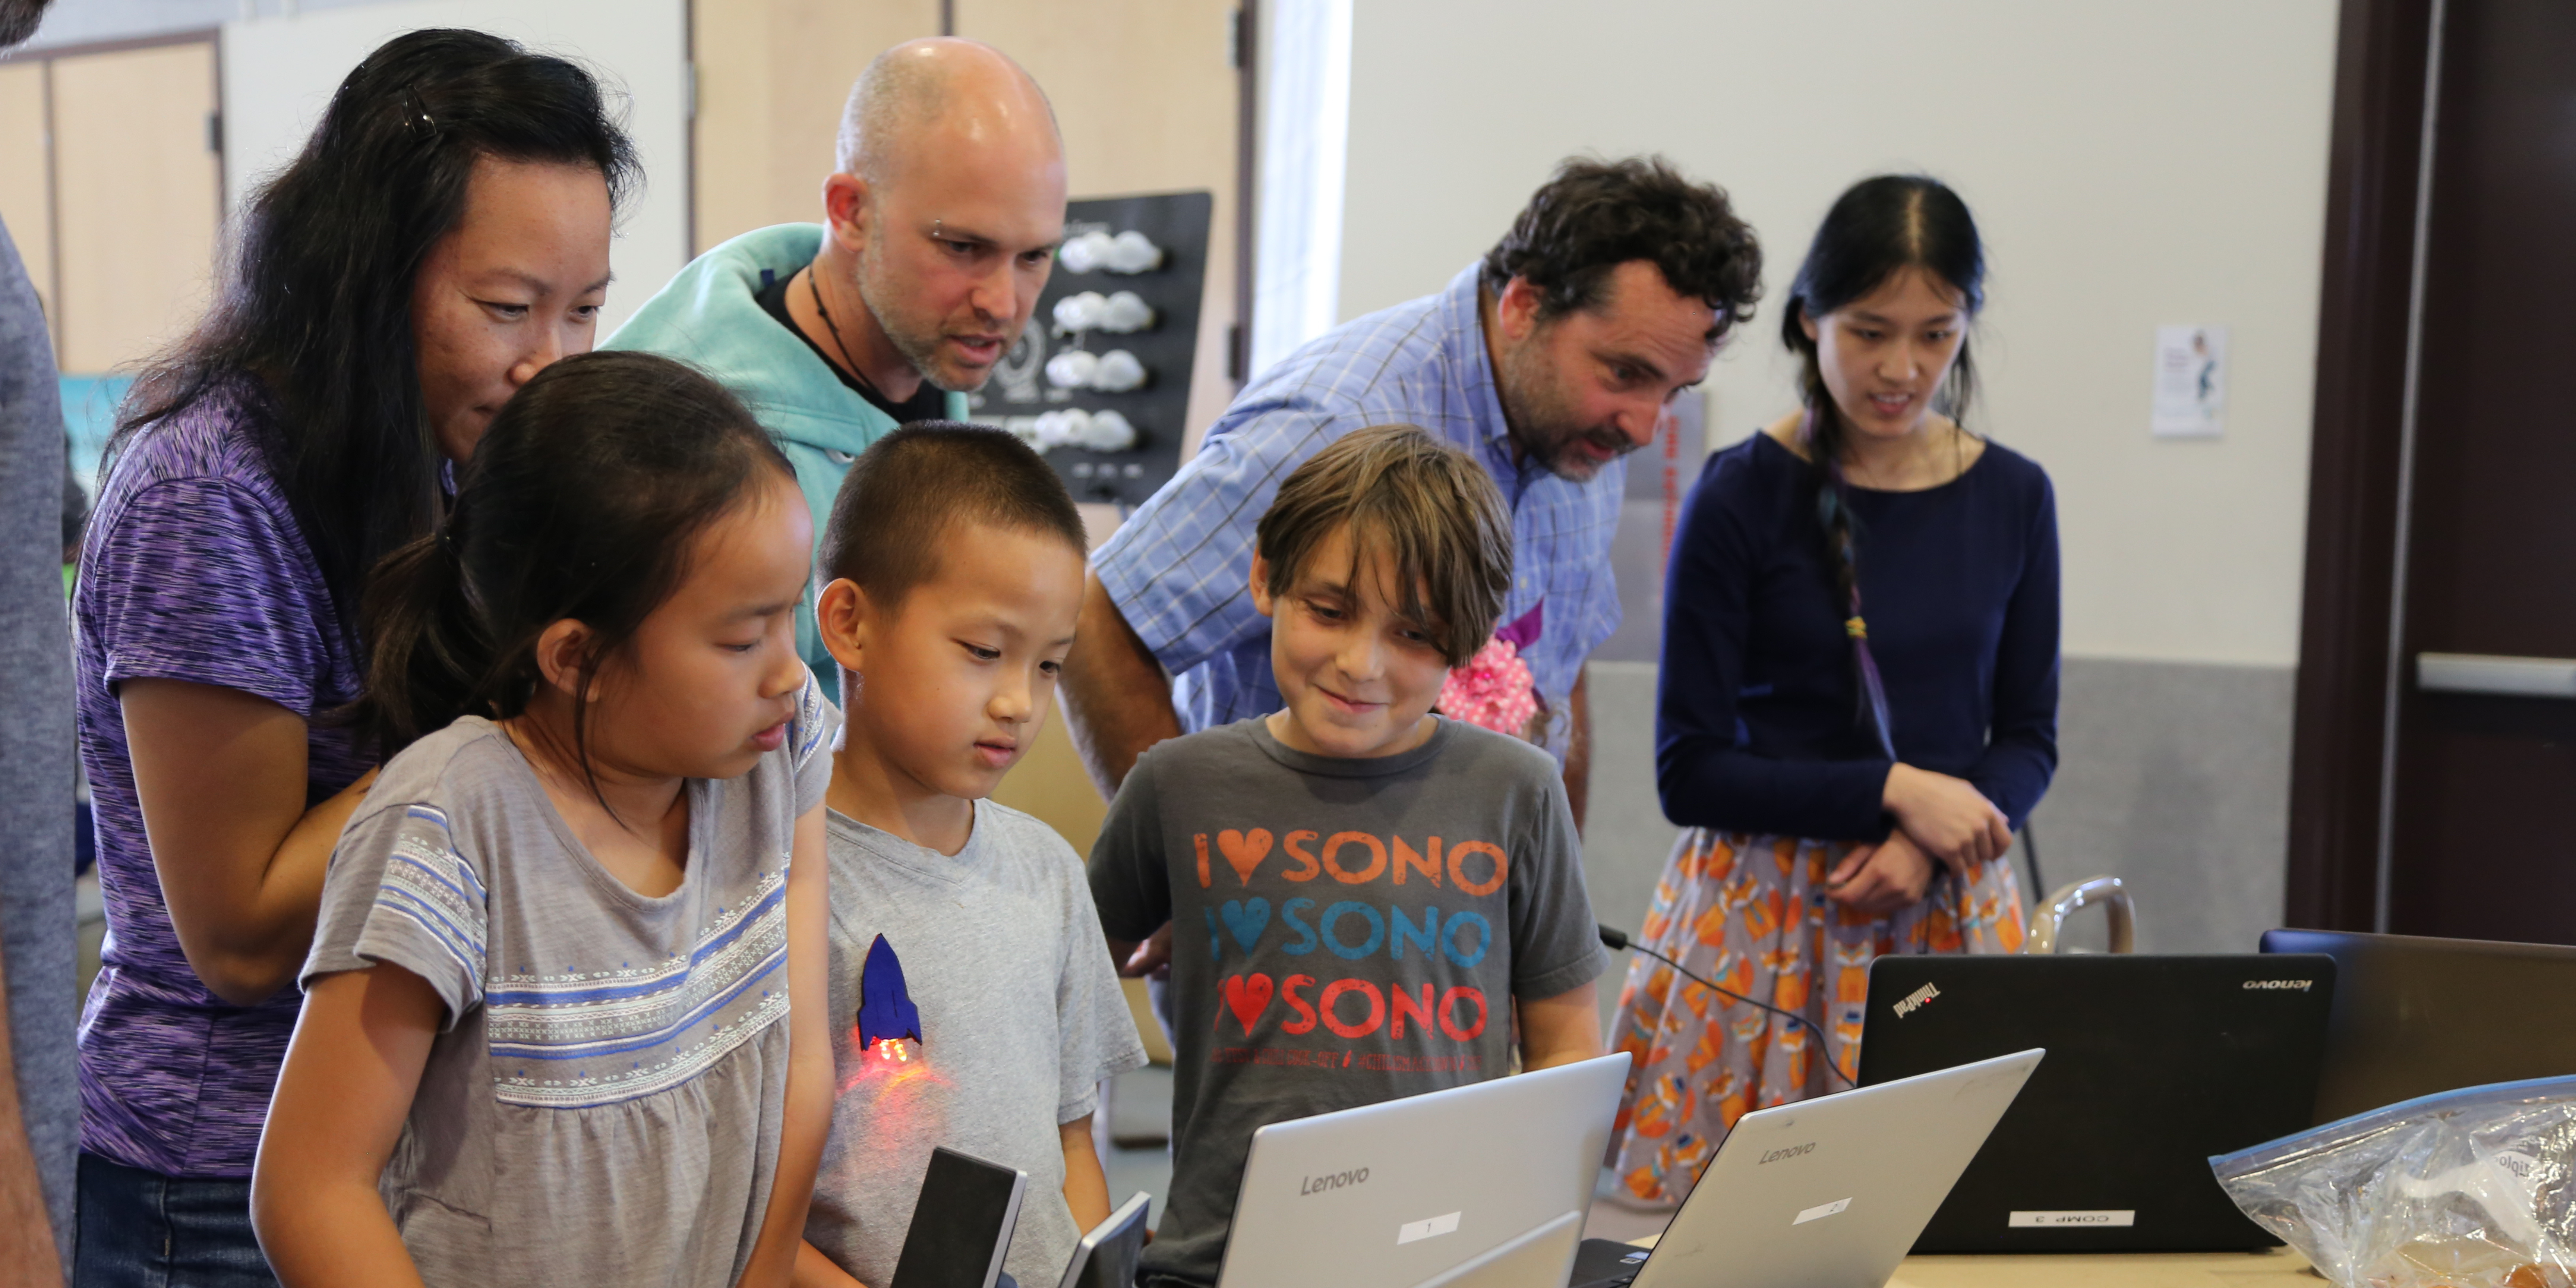 Children and adults surrounded around a computer.